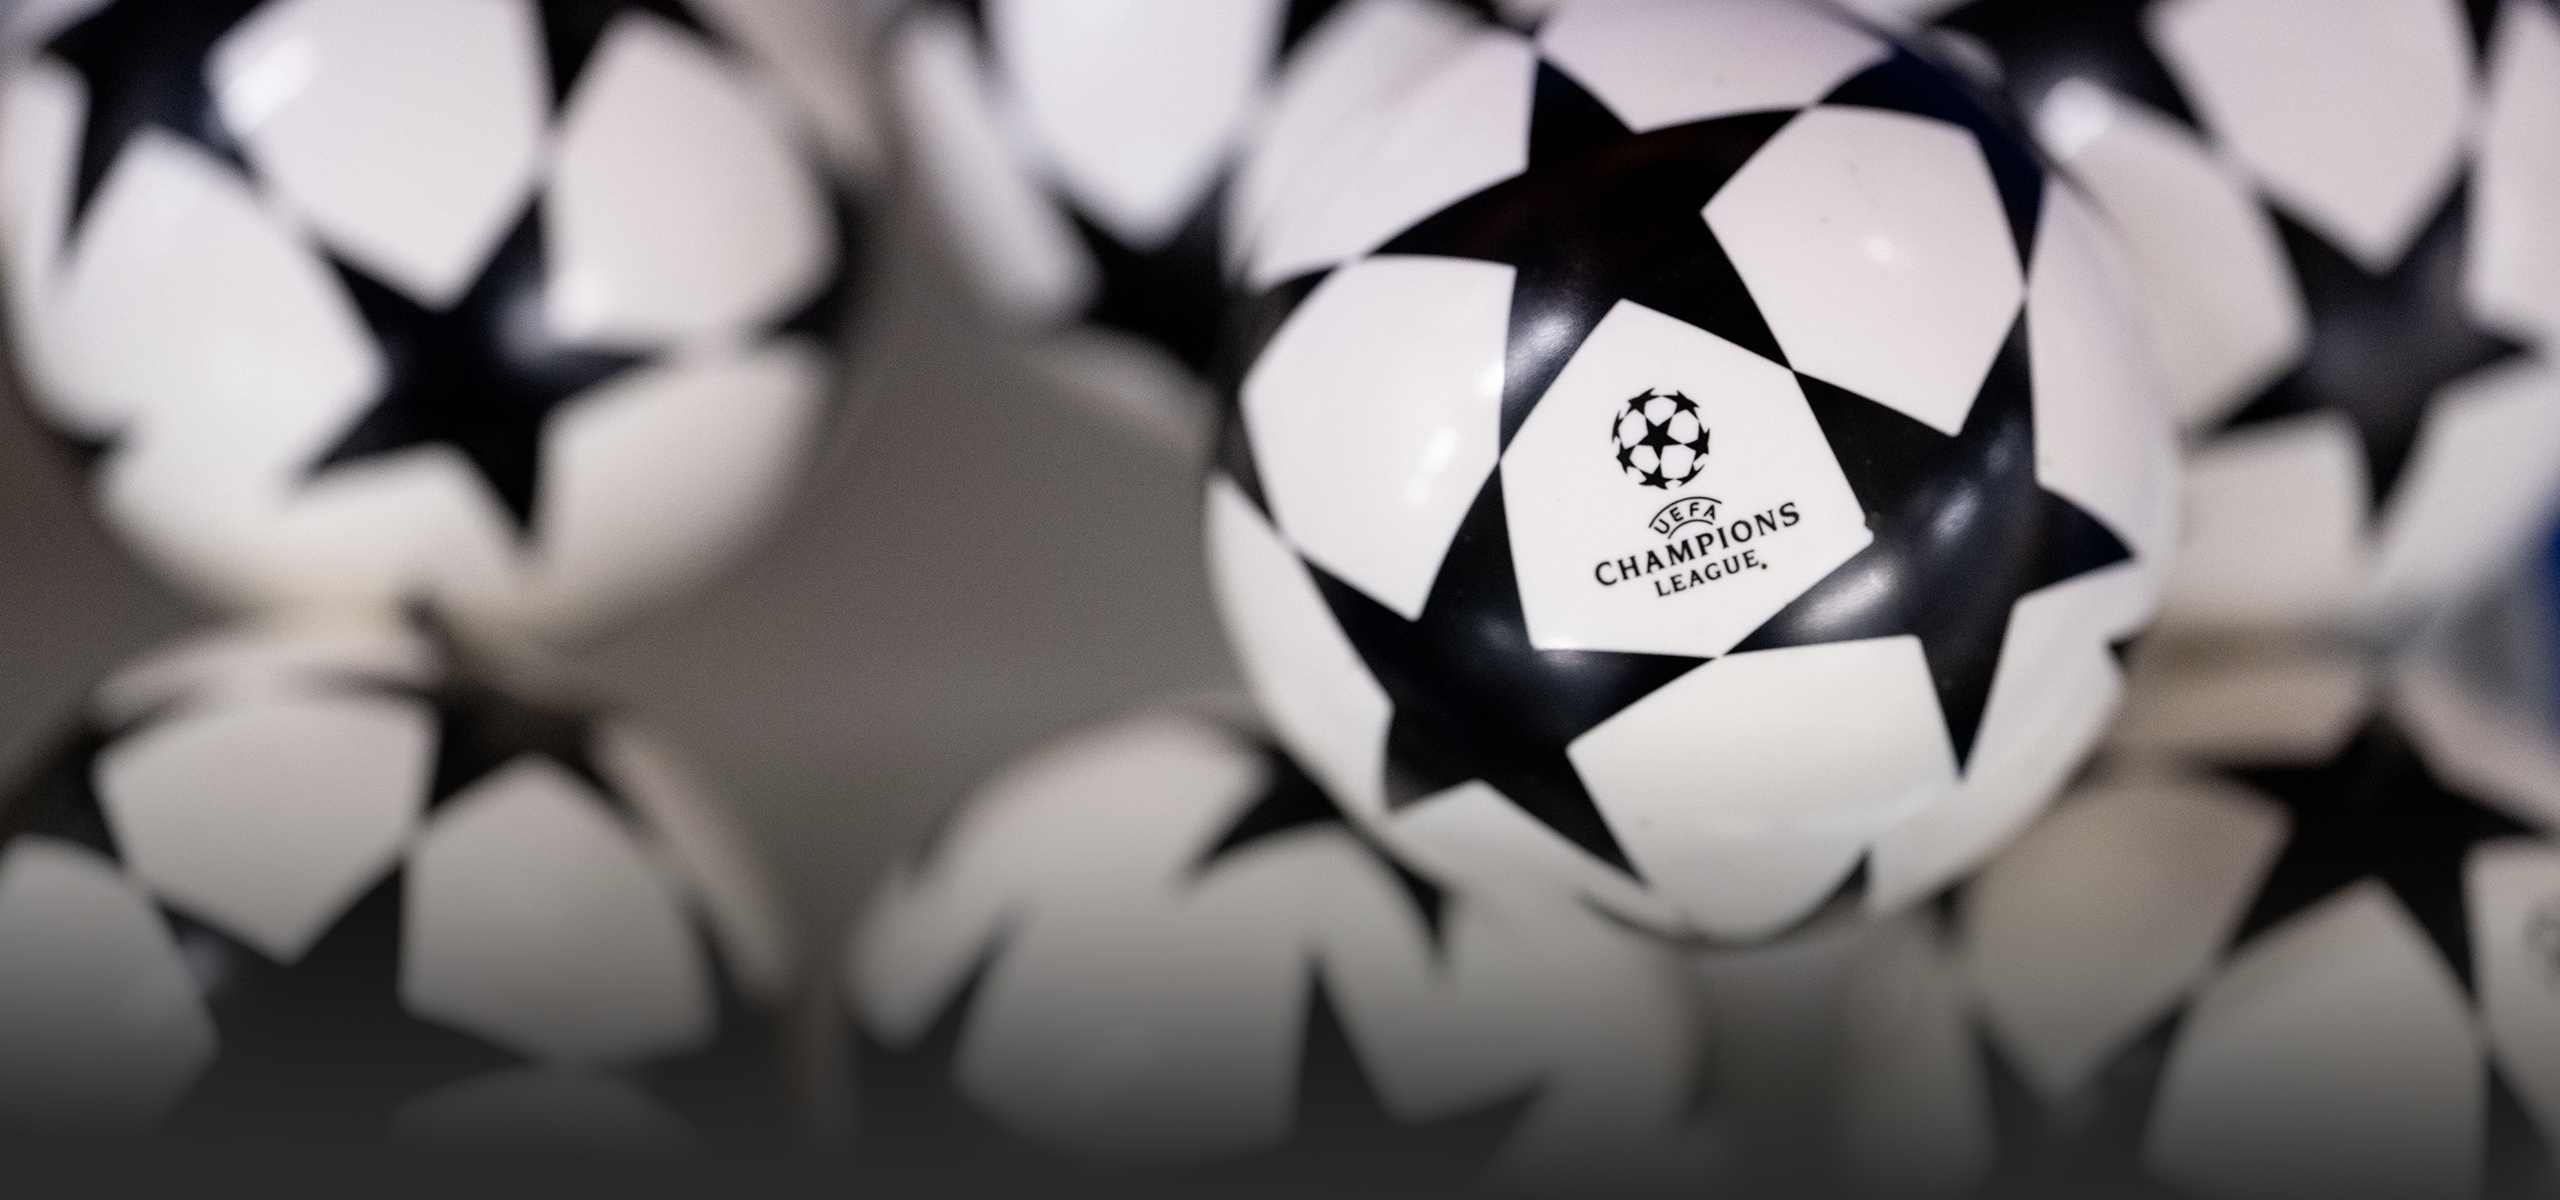 UEFA Champions League Draw: Liverpool to Face Real Madrid-saigonsouth.com.vn